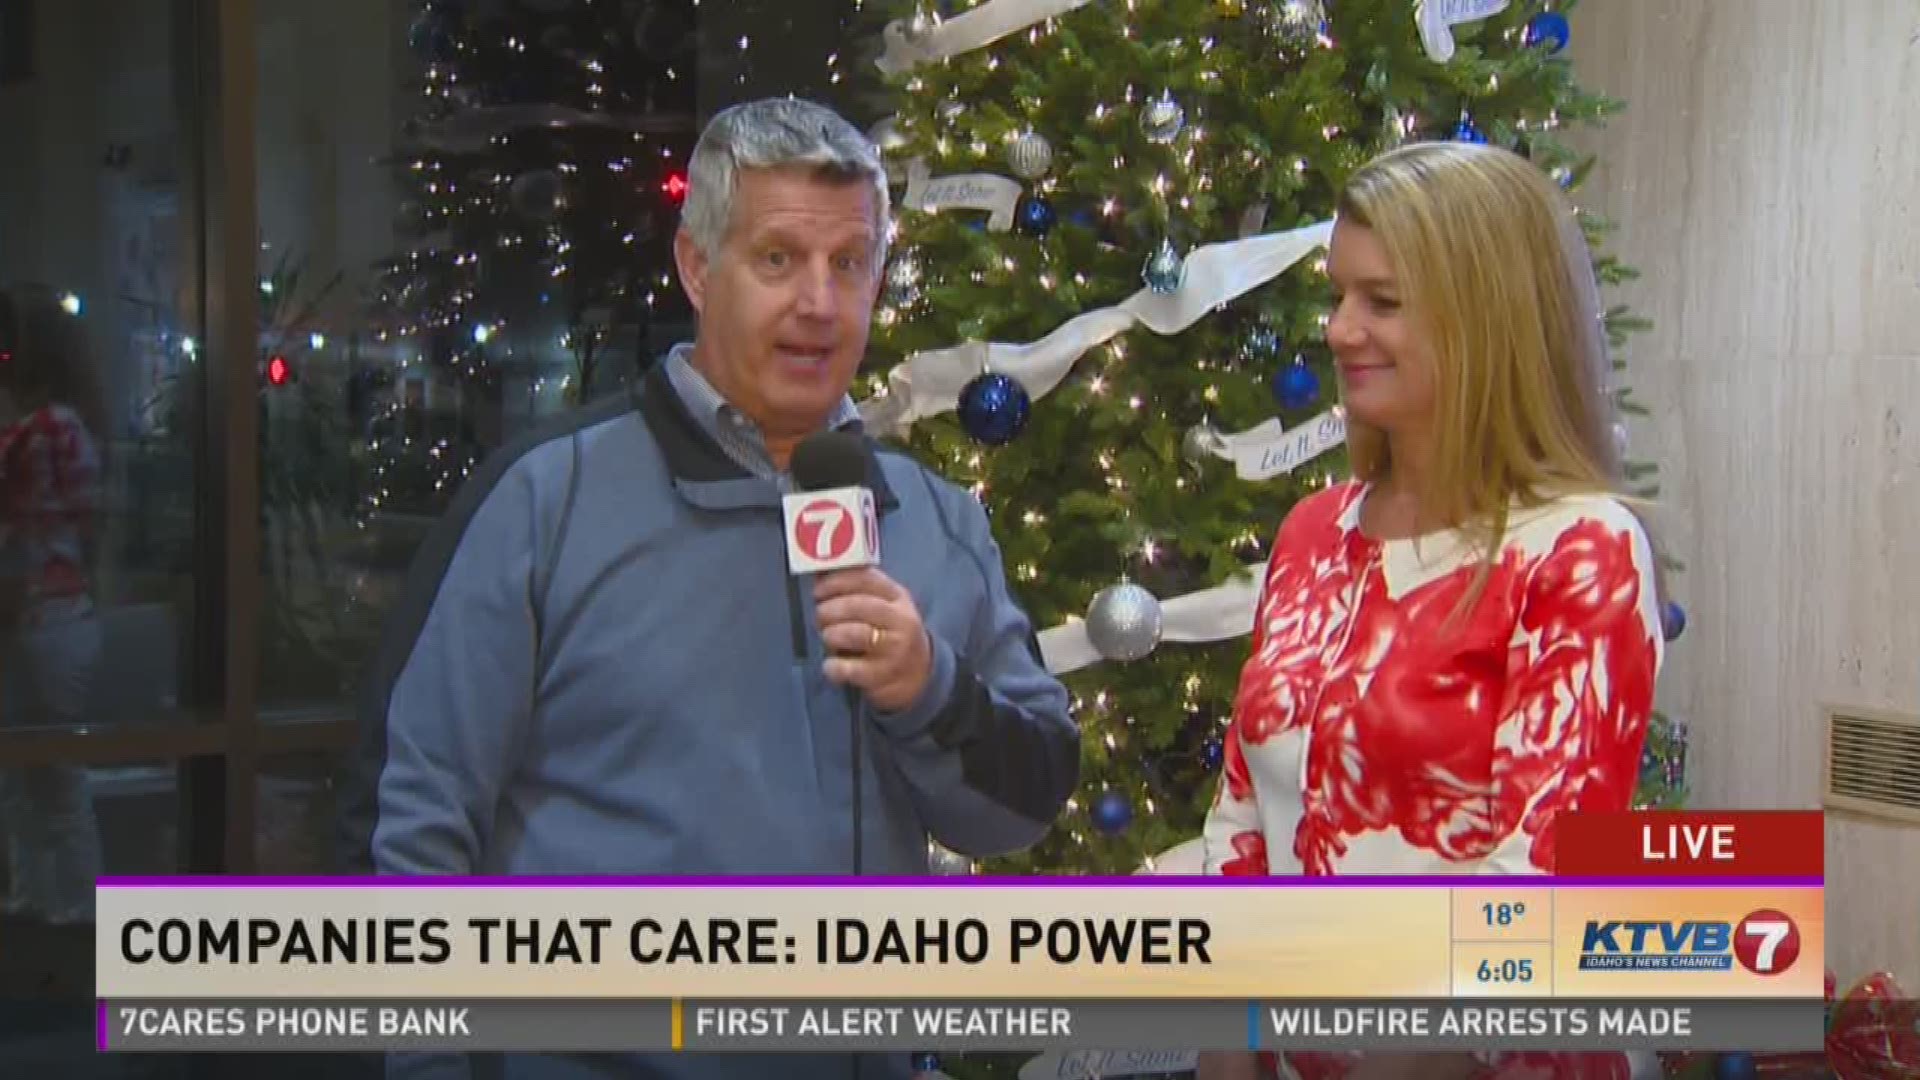 Idaho Power's 'Project Share' allows residents to donate money to help pay electric bills for those in need.